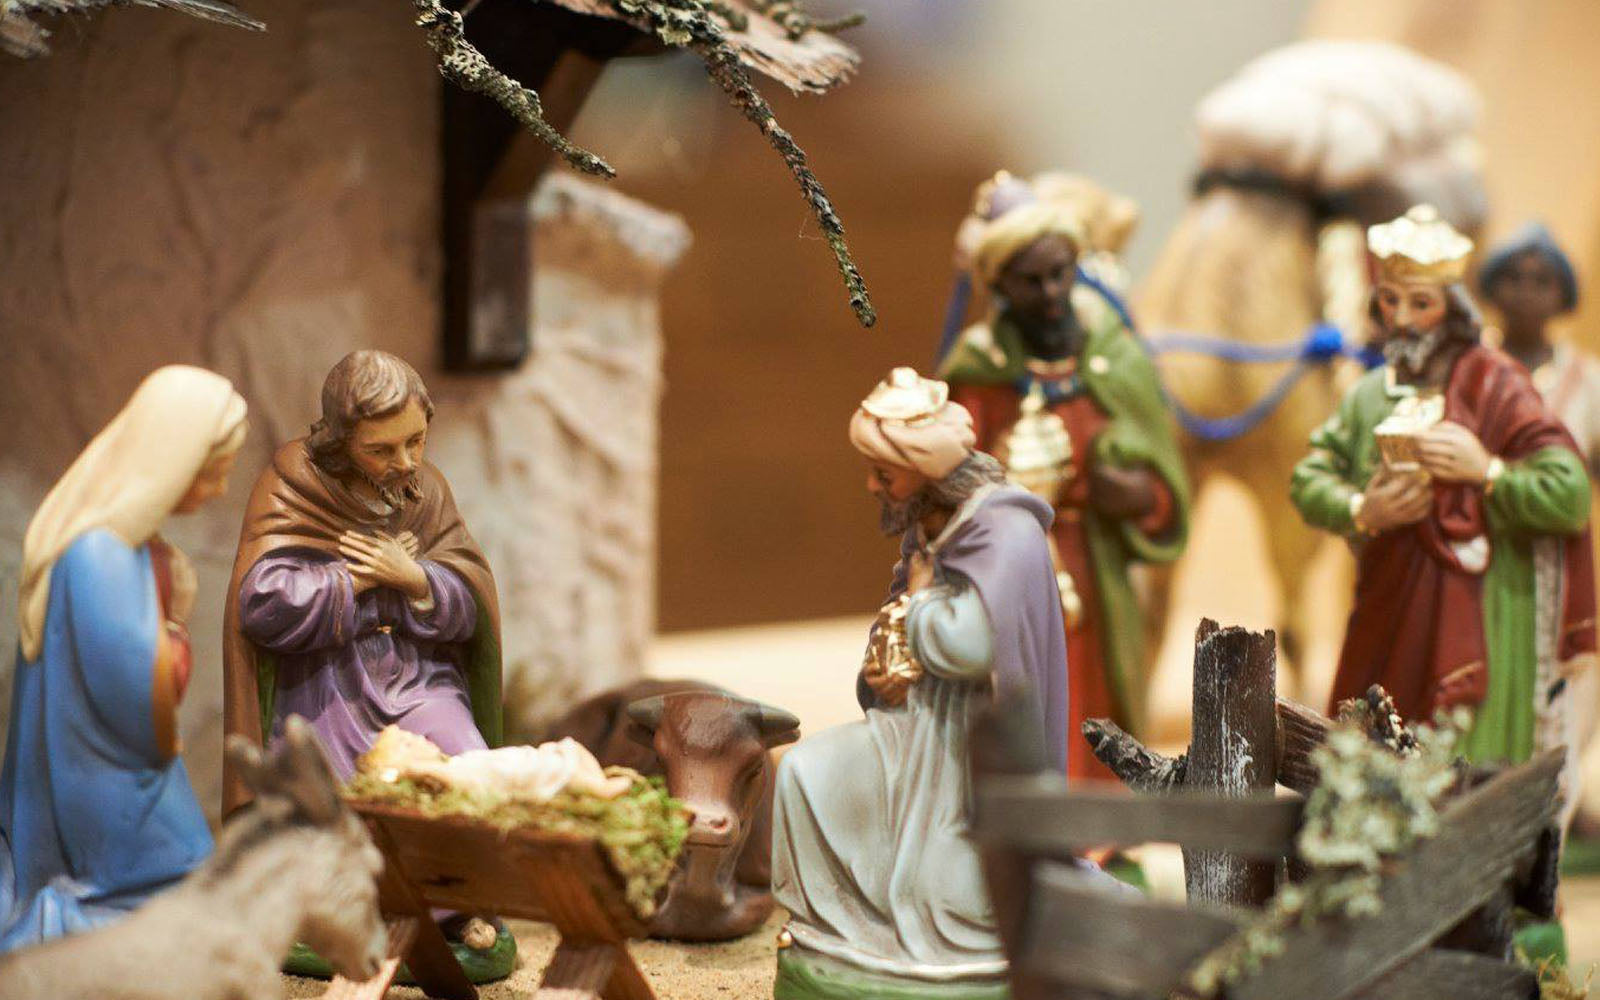 THE TRADITION OF THE CHRISTMAS NATIVITY SET